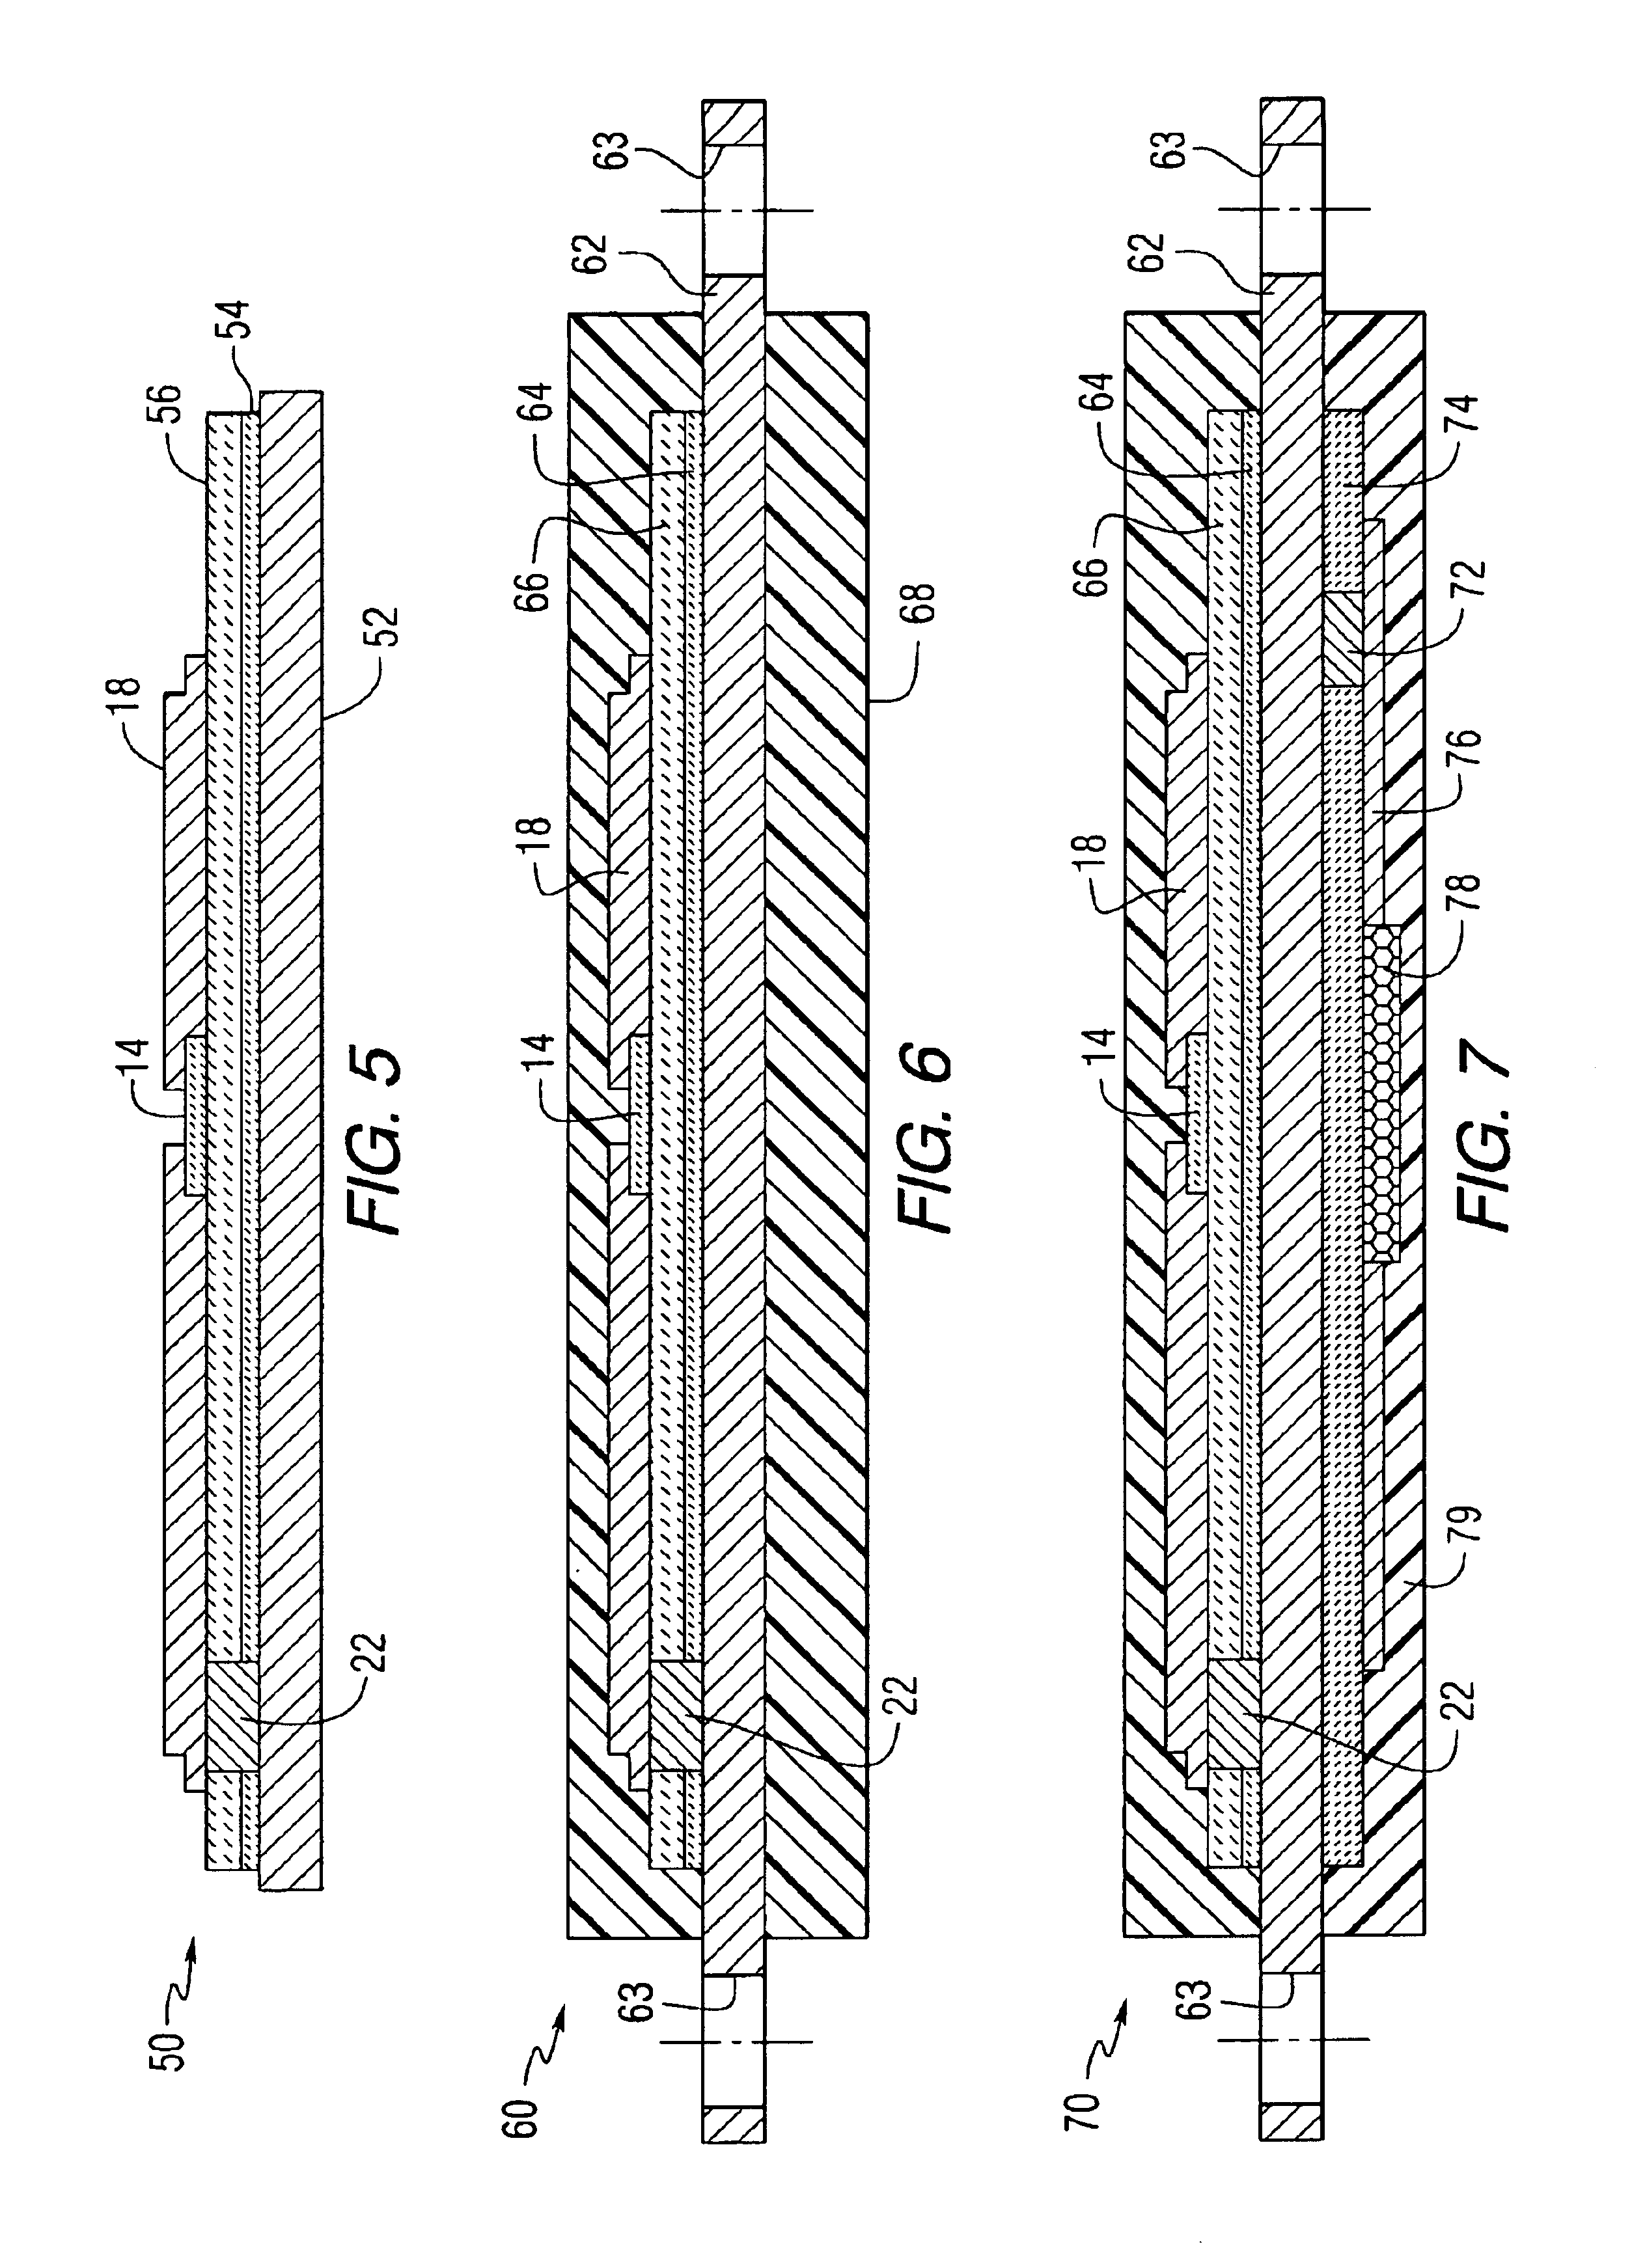 Tunable dielectric compositions including low loss glass